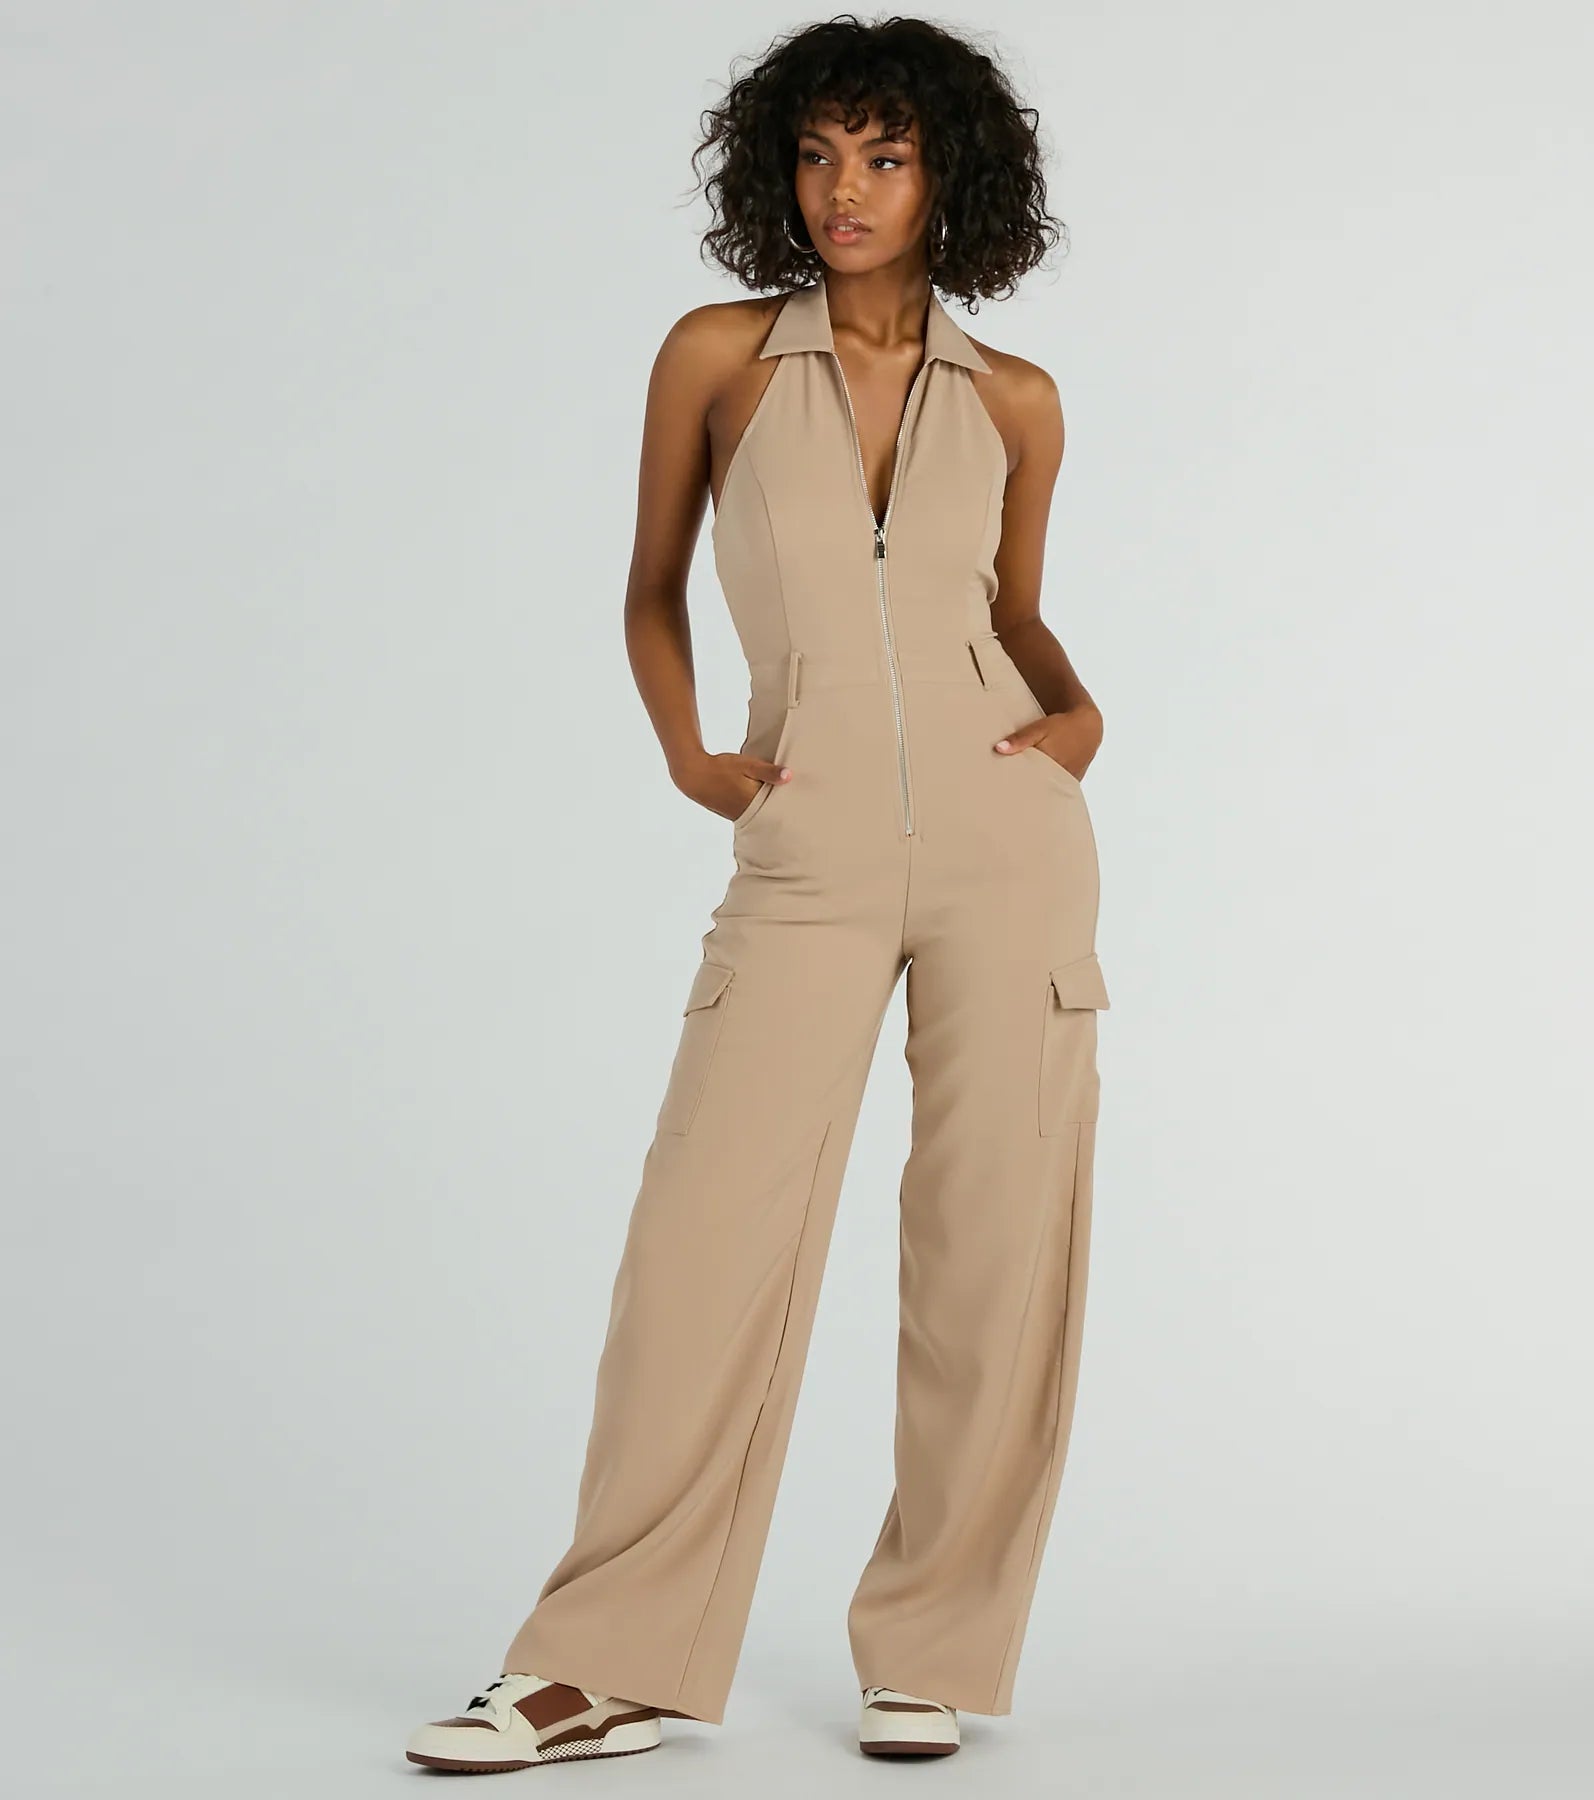 Front Zipper Pocketed Open-Back Sleeveless Collared Halter Jumpsuit